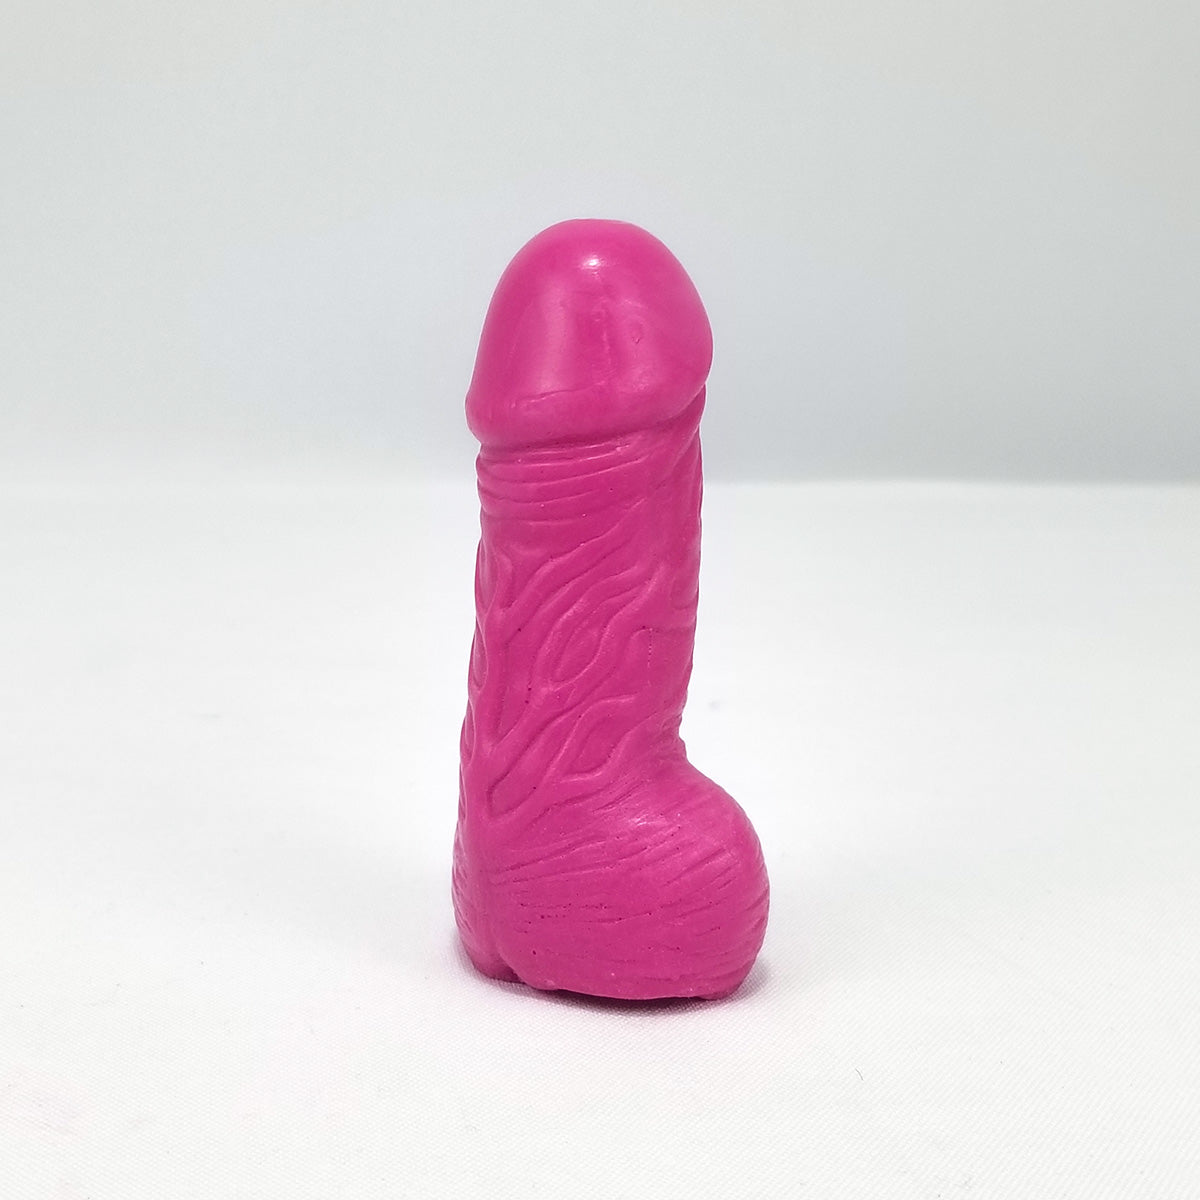 It's the Bomb - Chubs Penis Soap - Pink